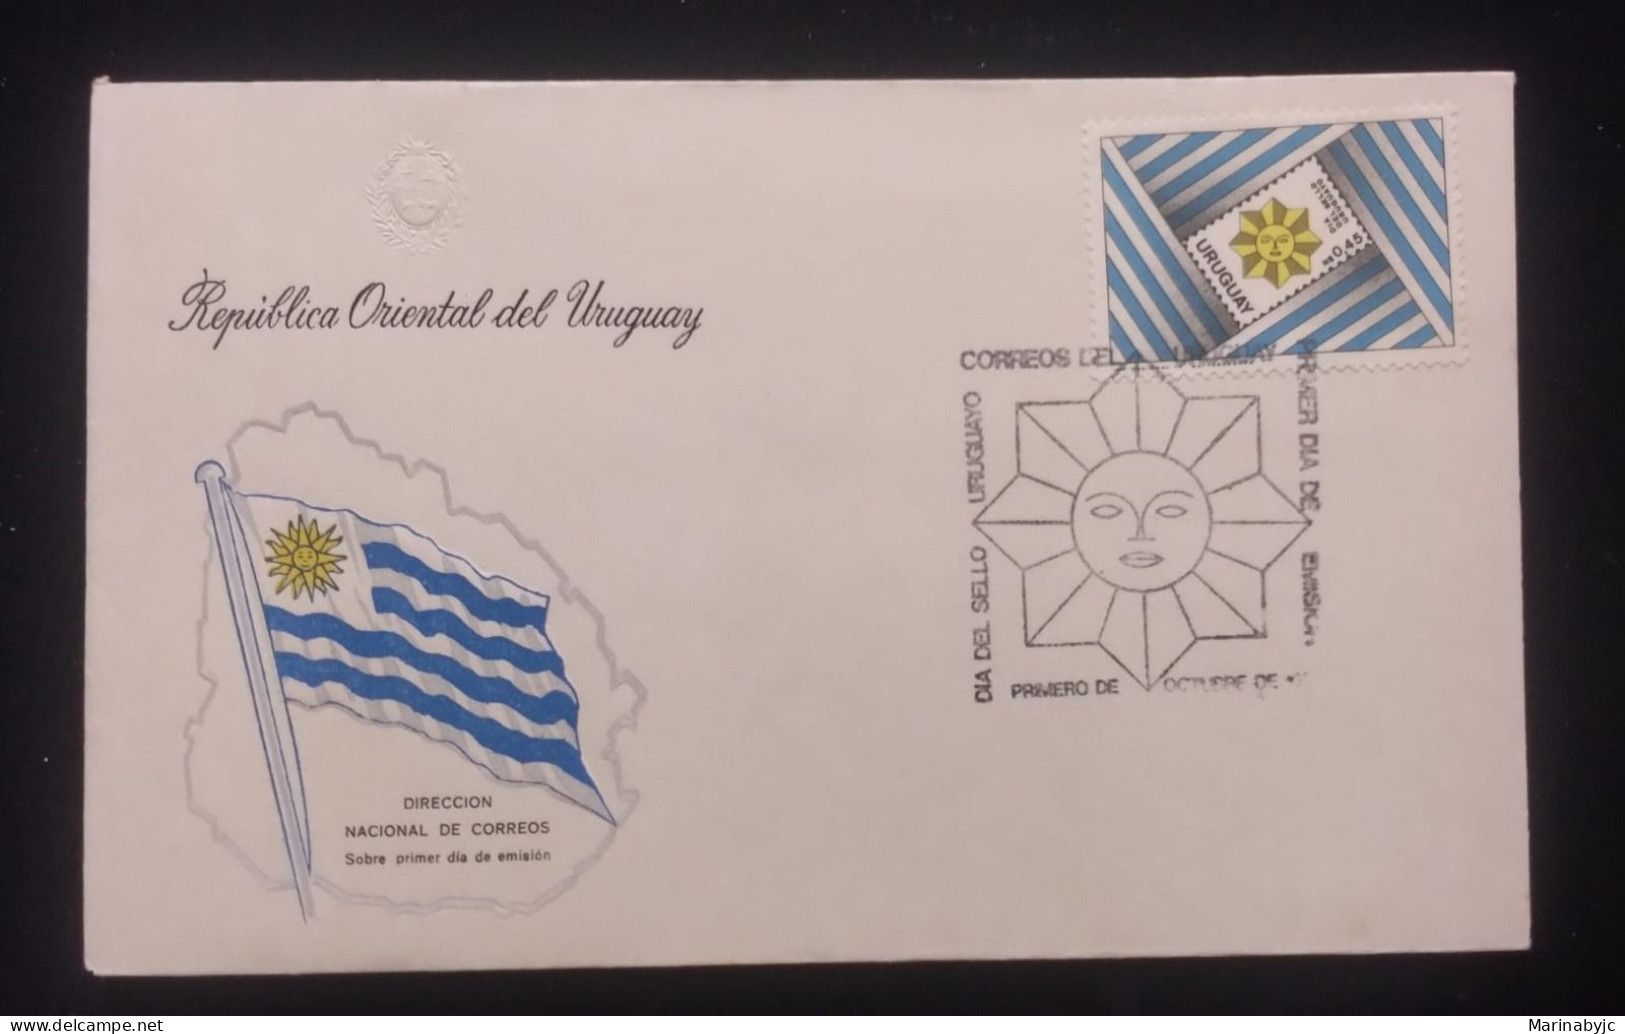 D)1977, URUGUAY, FIRST DAY COVER, ISSUE, POST OFFICE AND PHILATELY/STAMP DAY, FDC - Uruguay